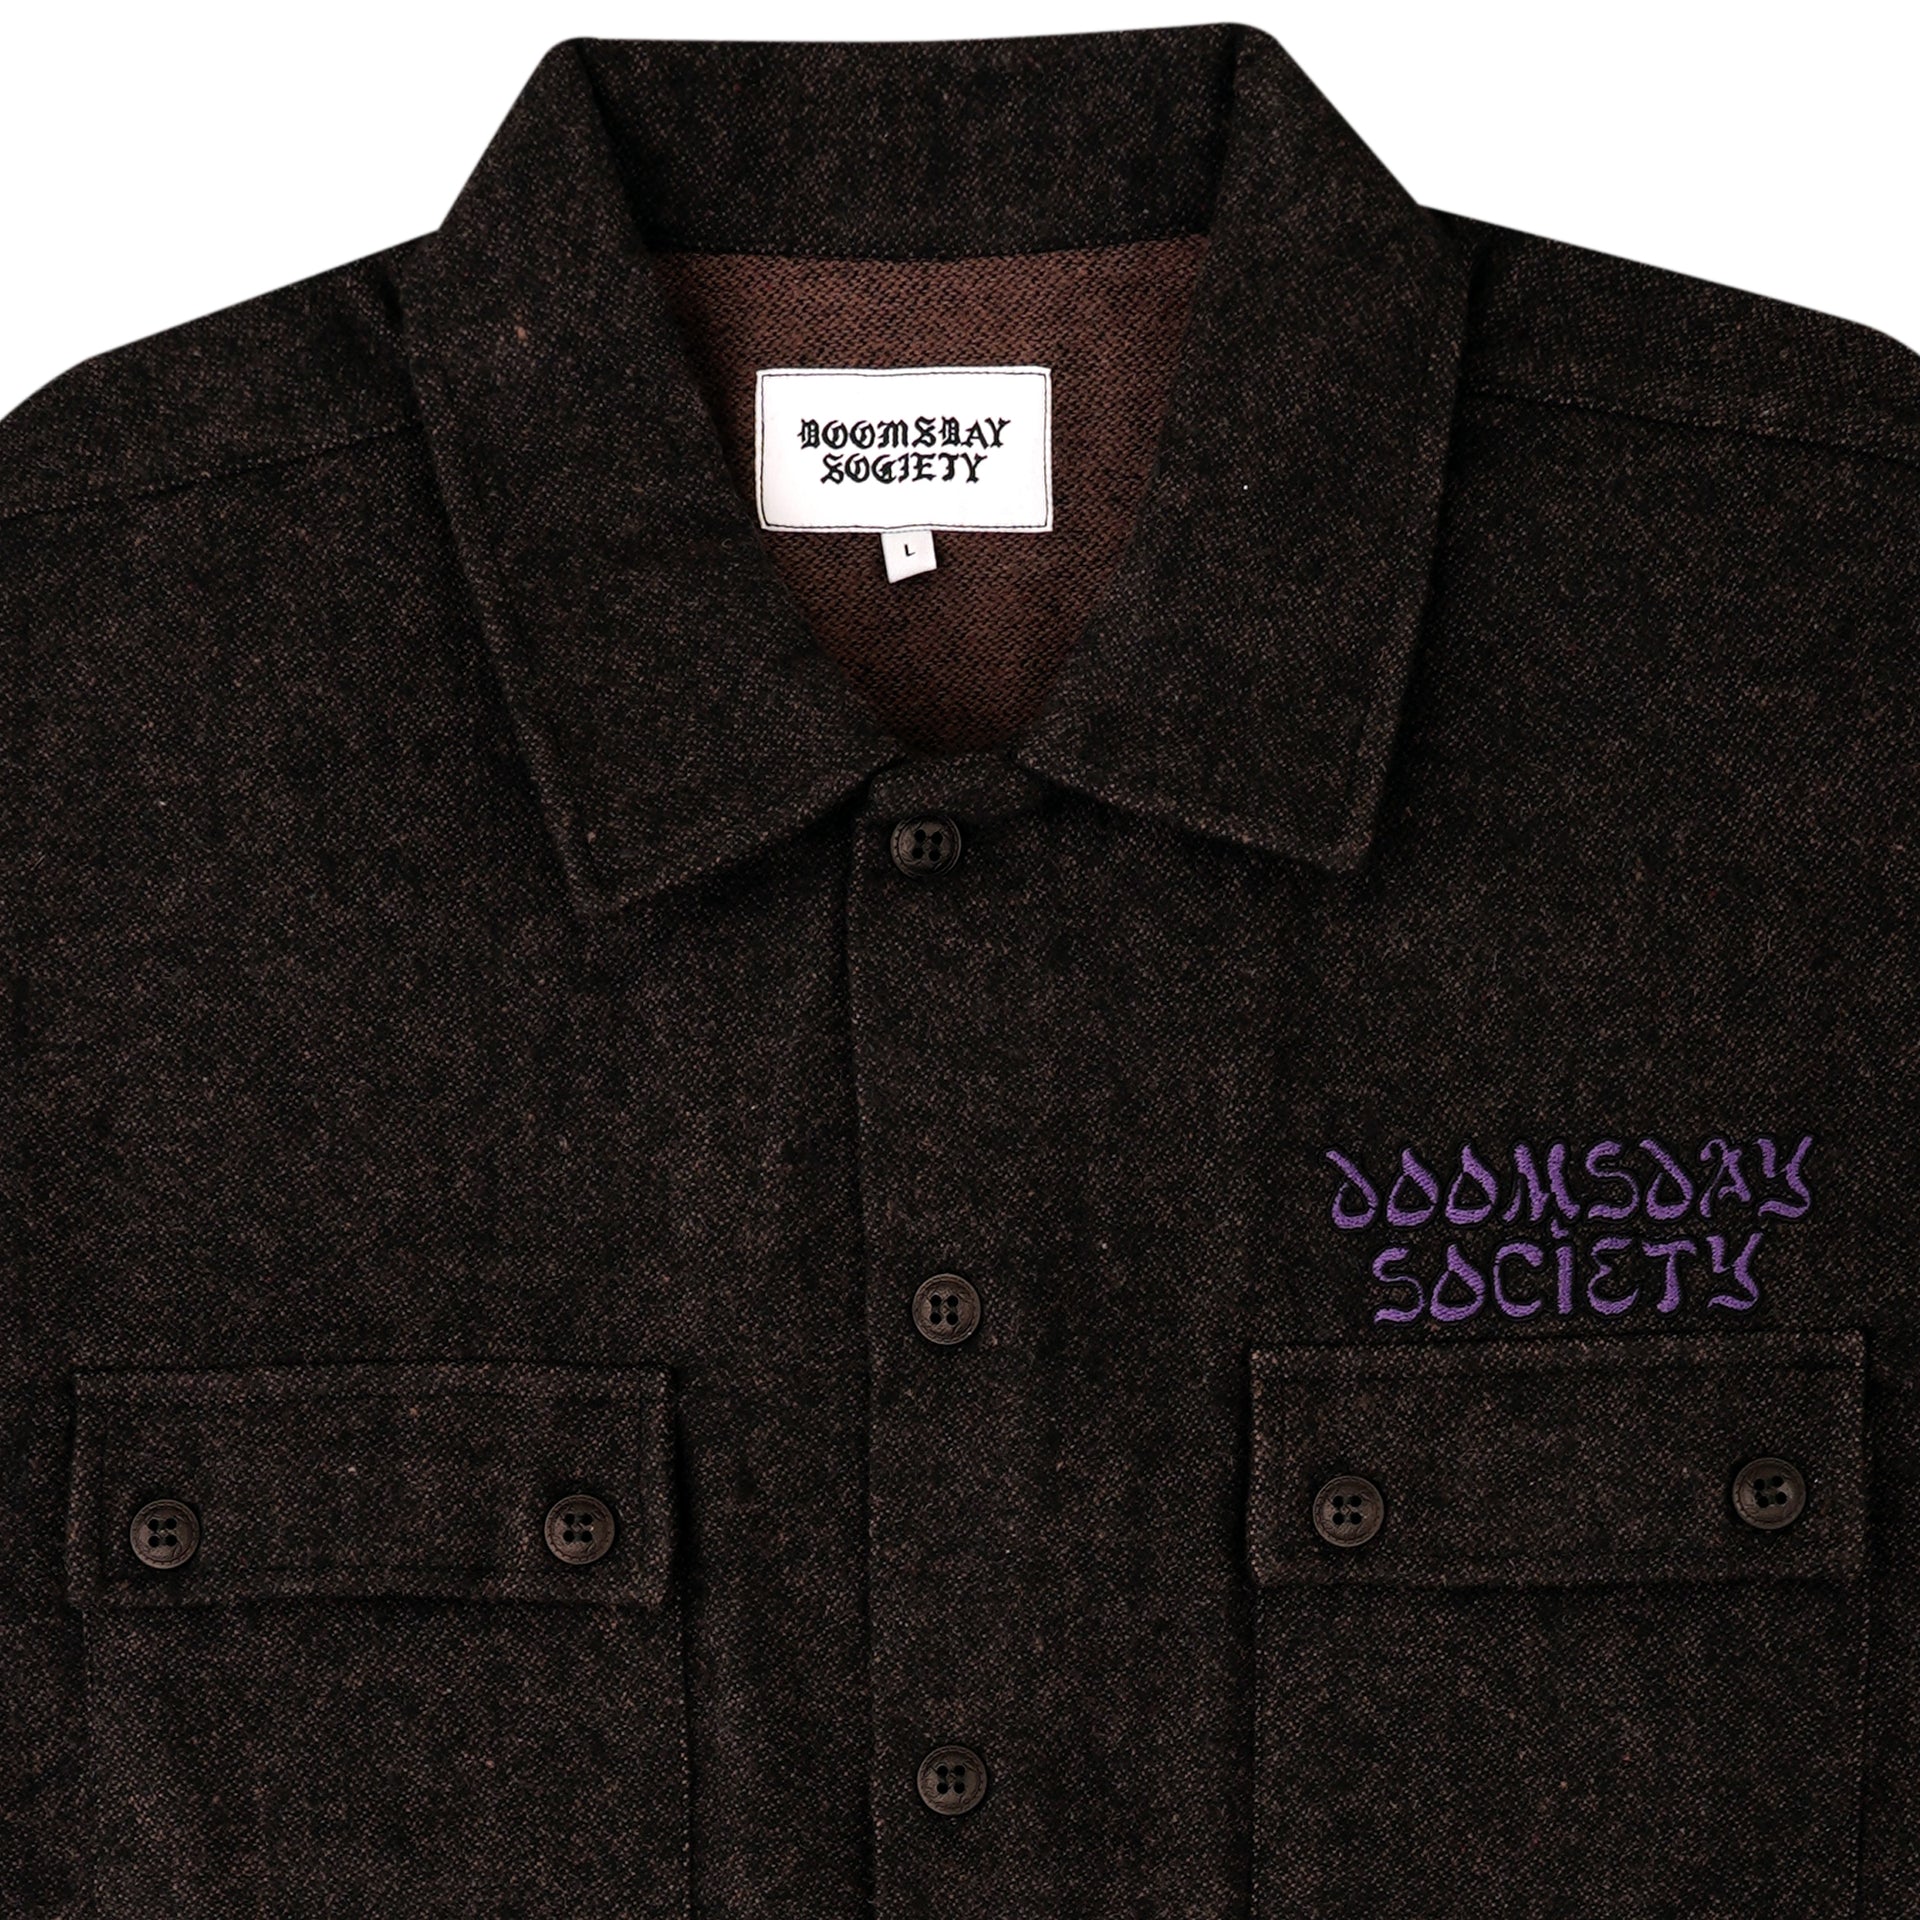 ART OF SEEING FLANNEL EMBROIDERED SHIRT